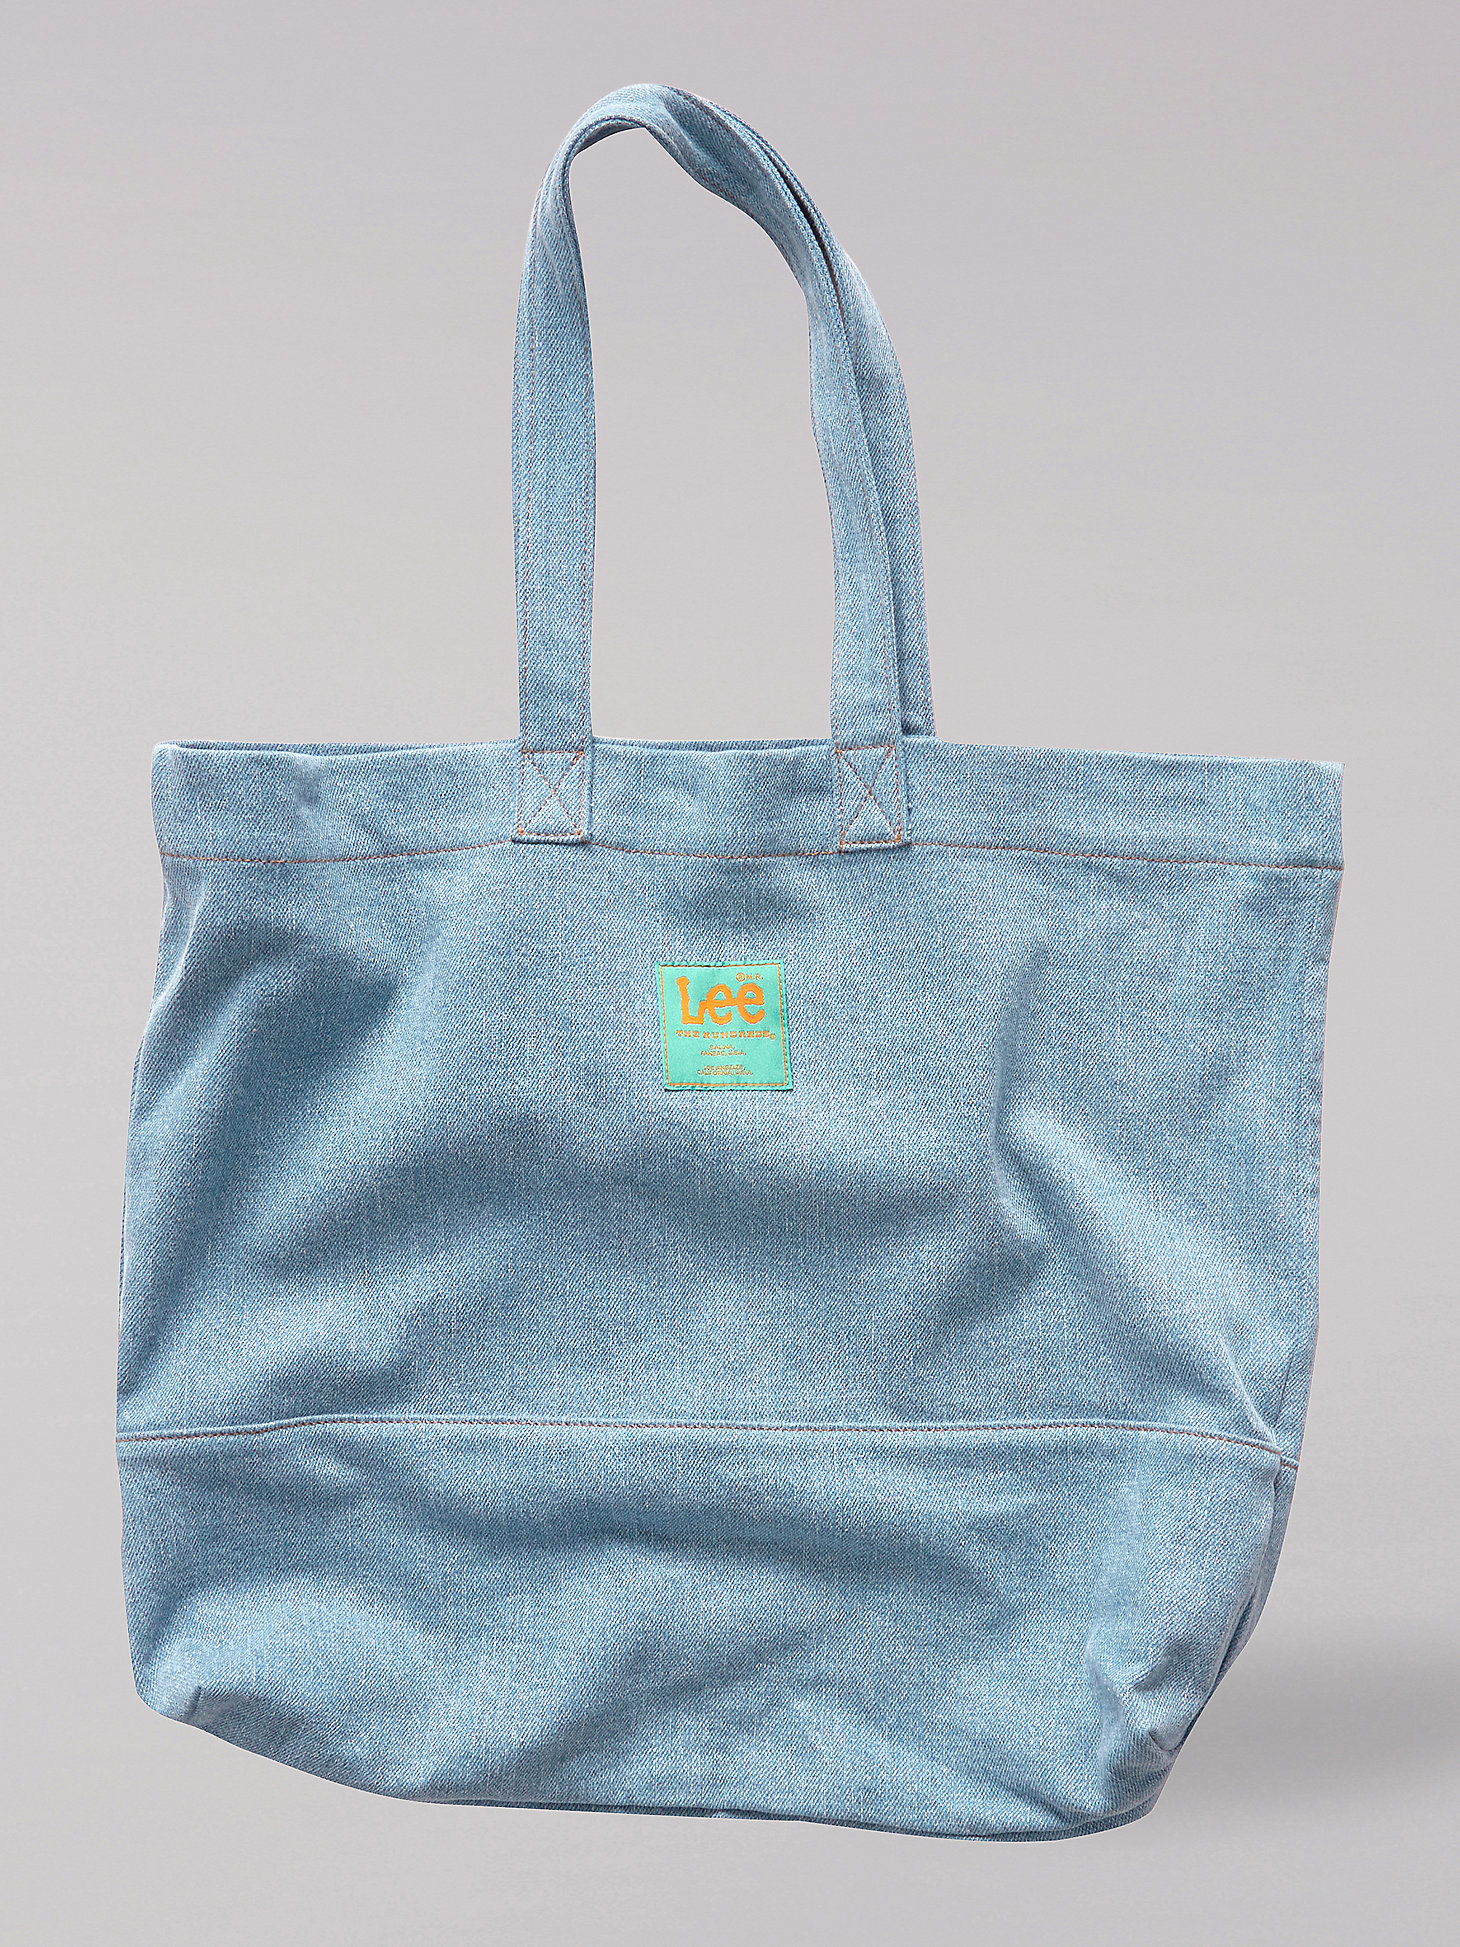 Men's Lee® x The Hundreds® Tote Bag in Stone Wash alternative view 2